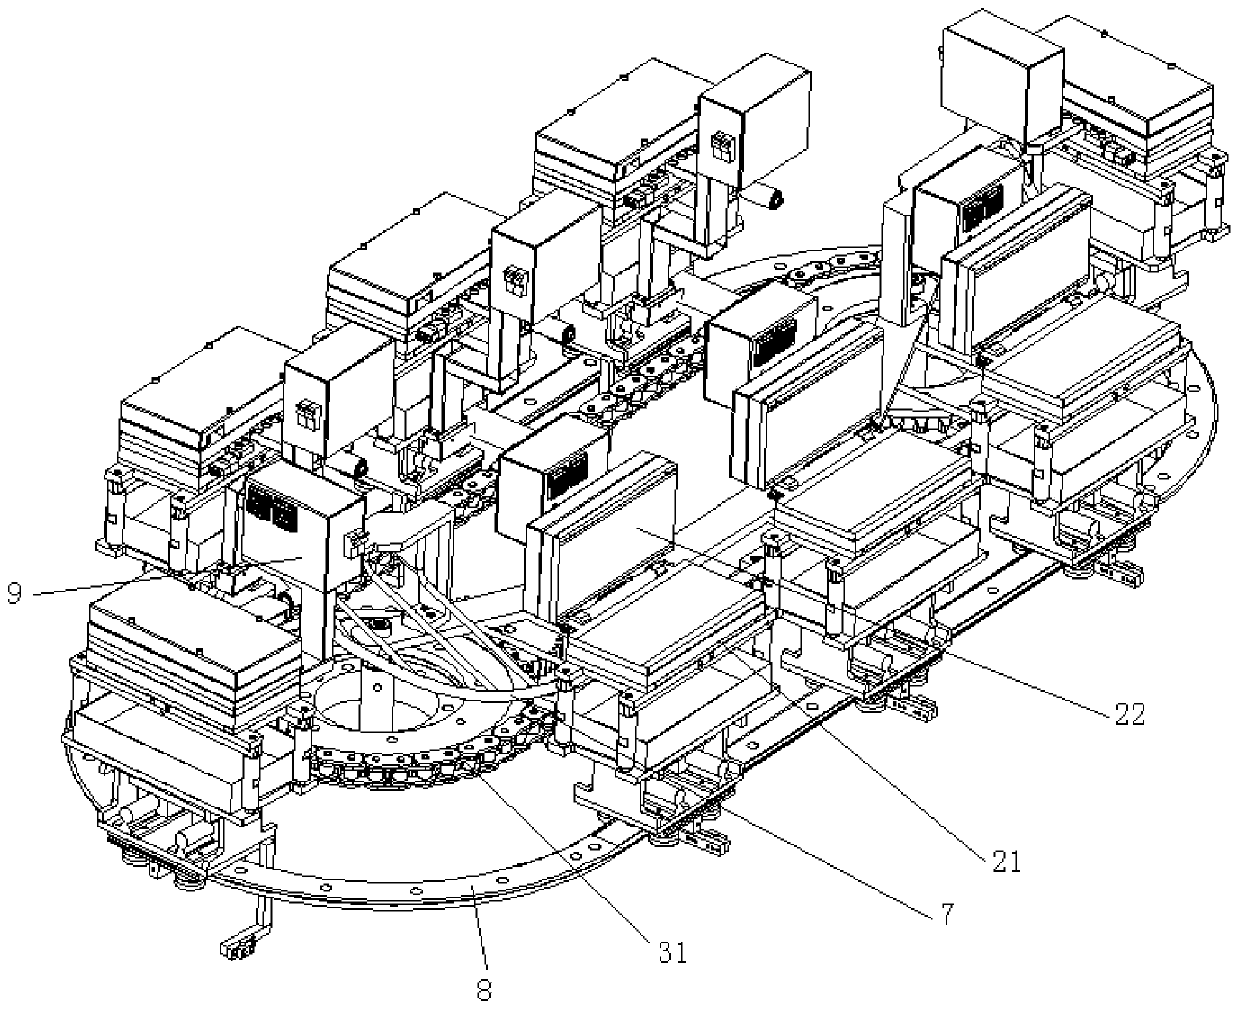 Egg roll processing device